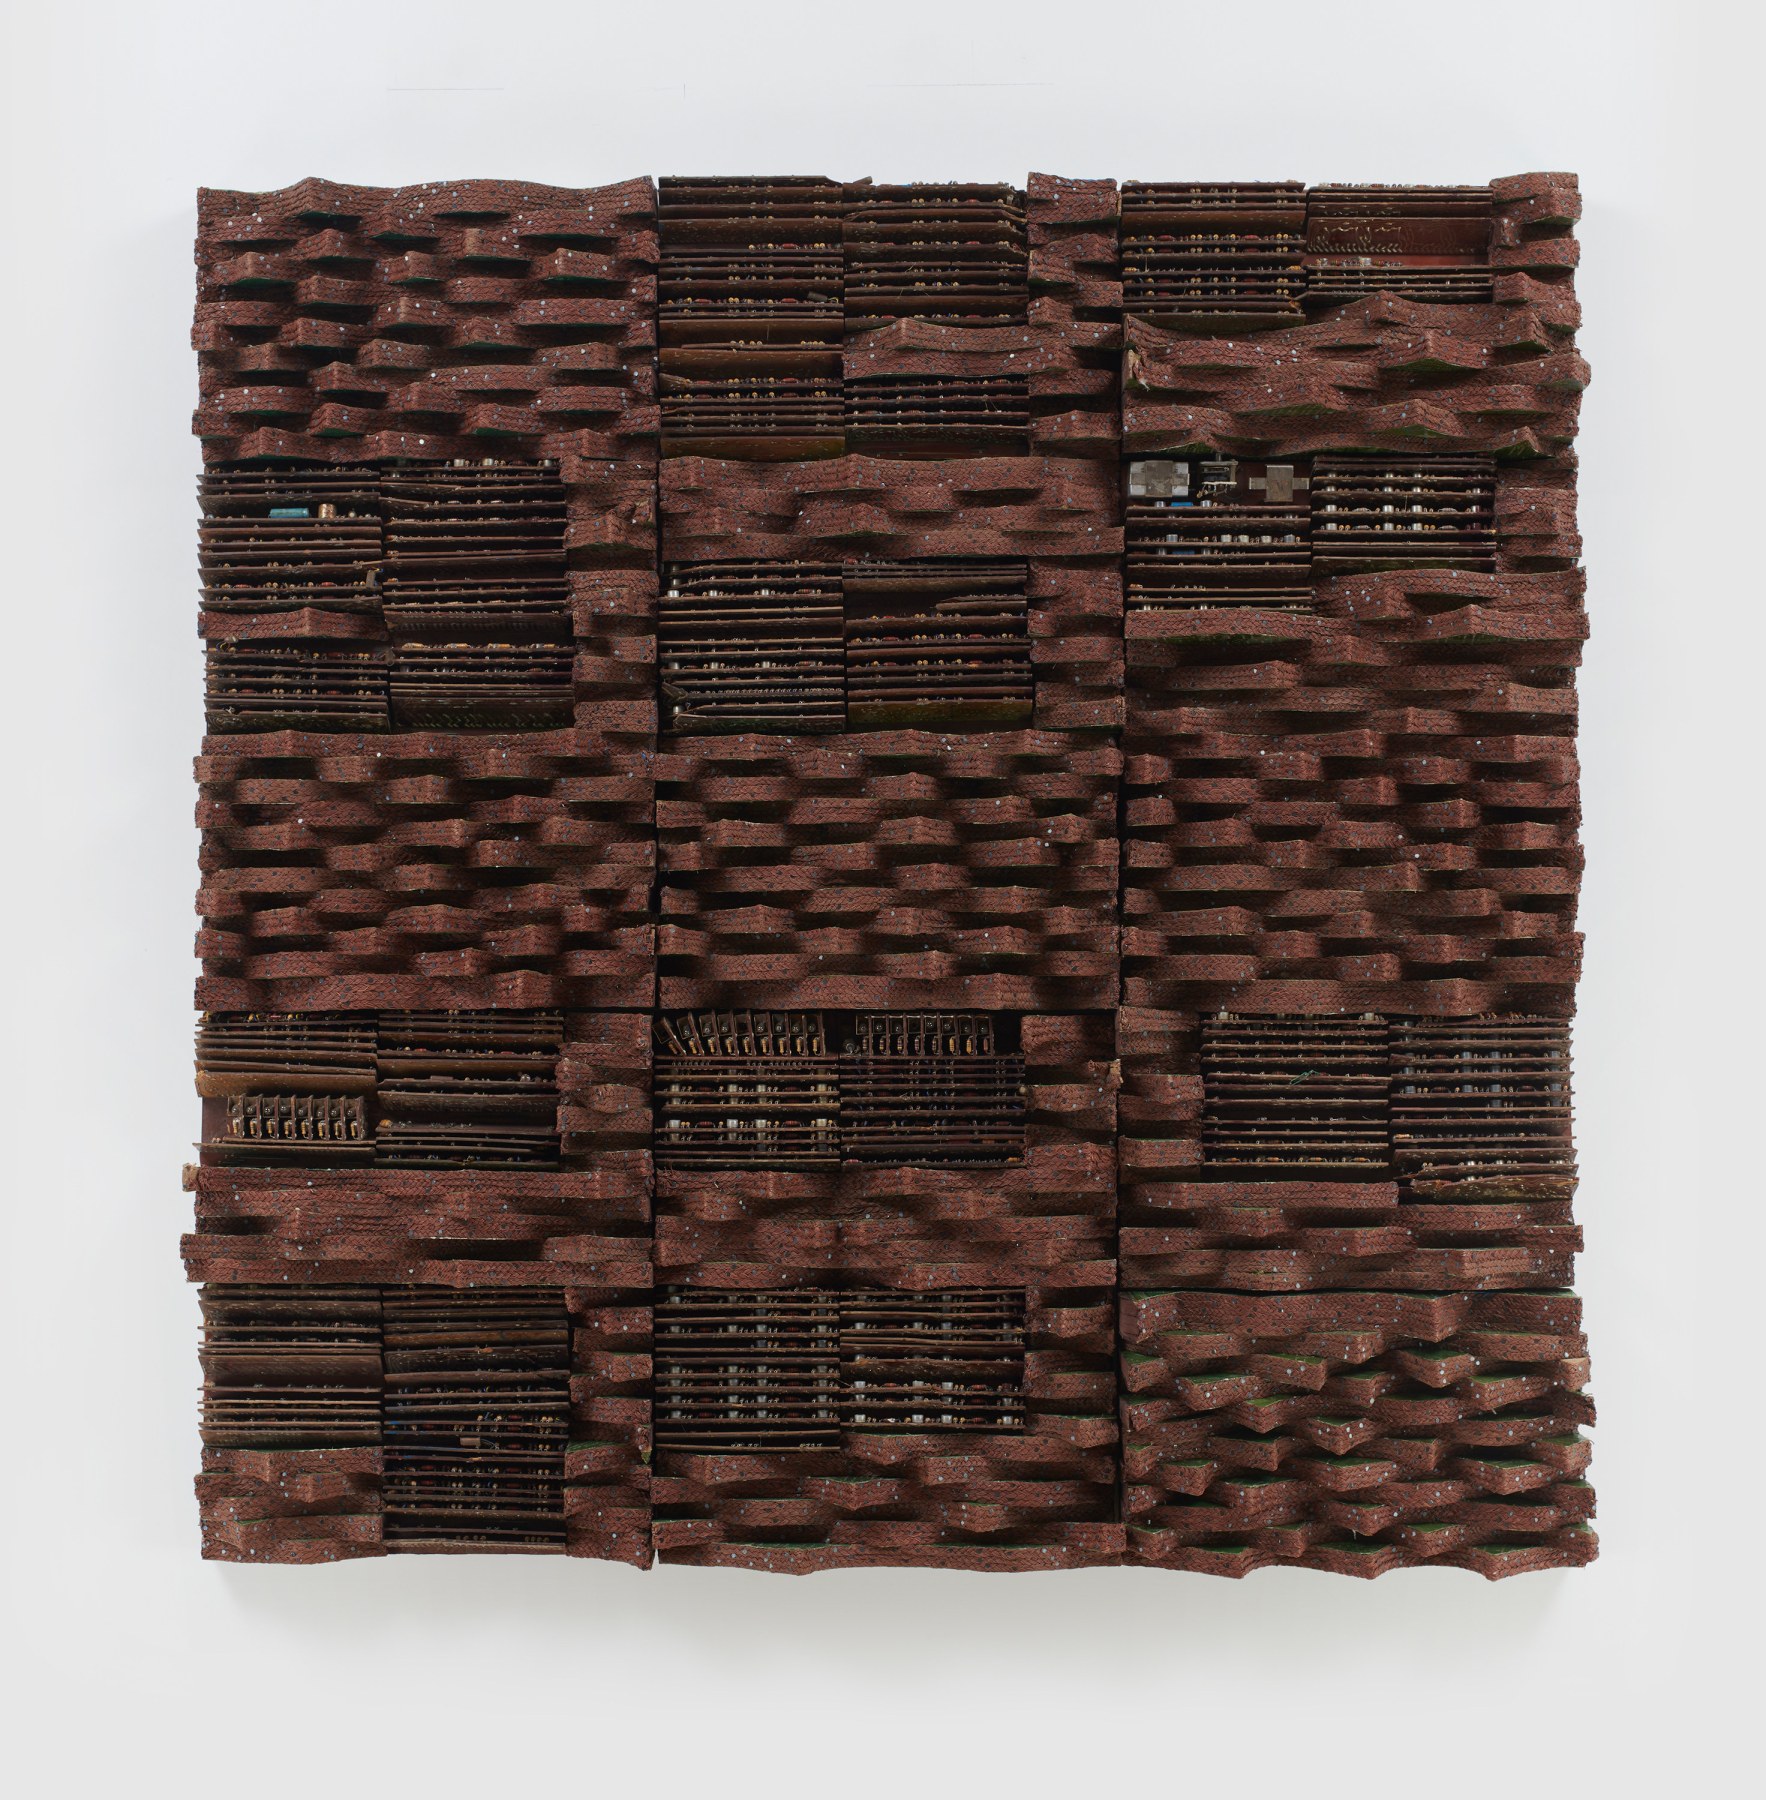 woven electrical wires and components on panel creating a brown surface